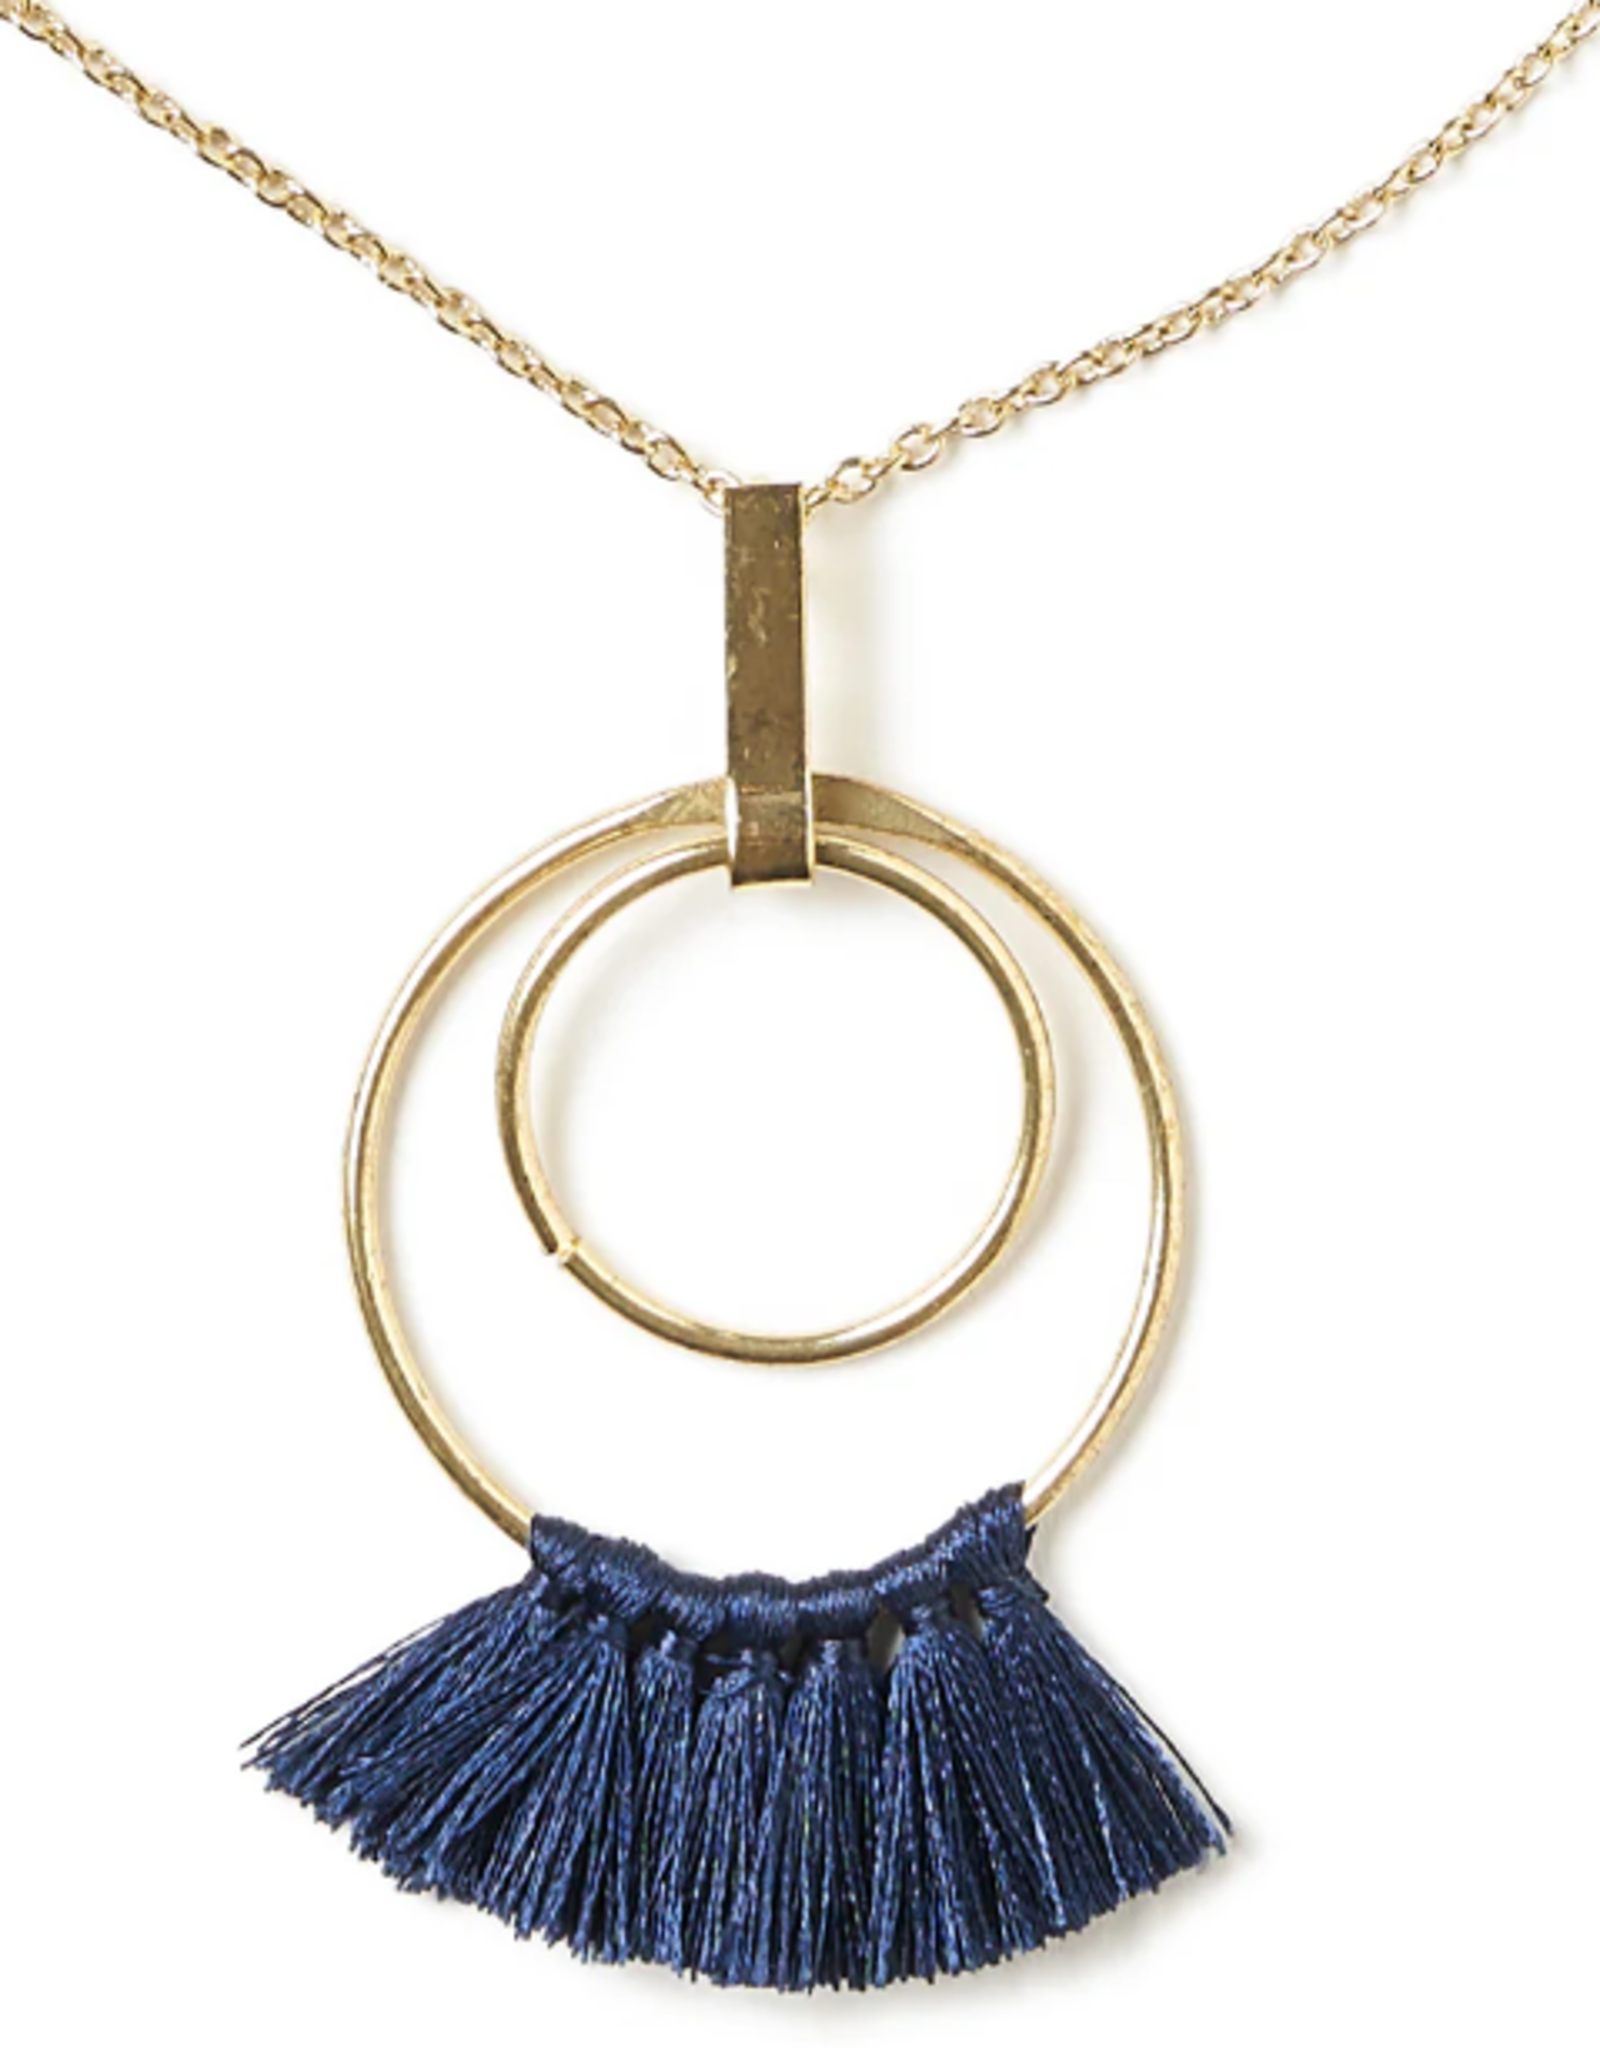 India CLEARANCE Danu Drop Necklace w/ Navy Tassels, India